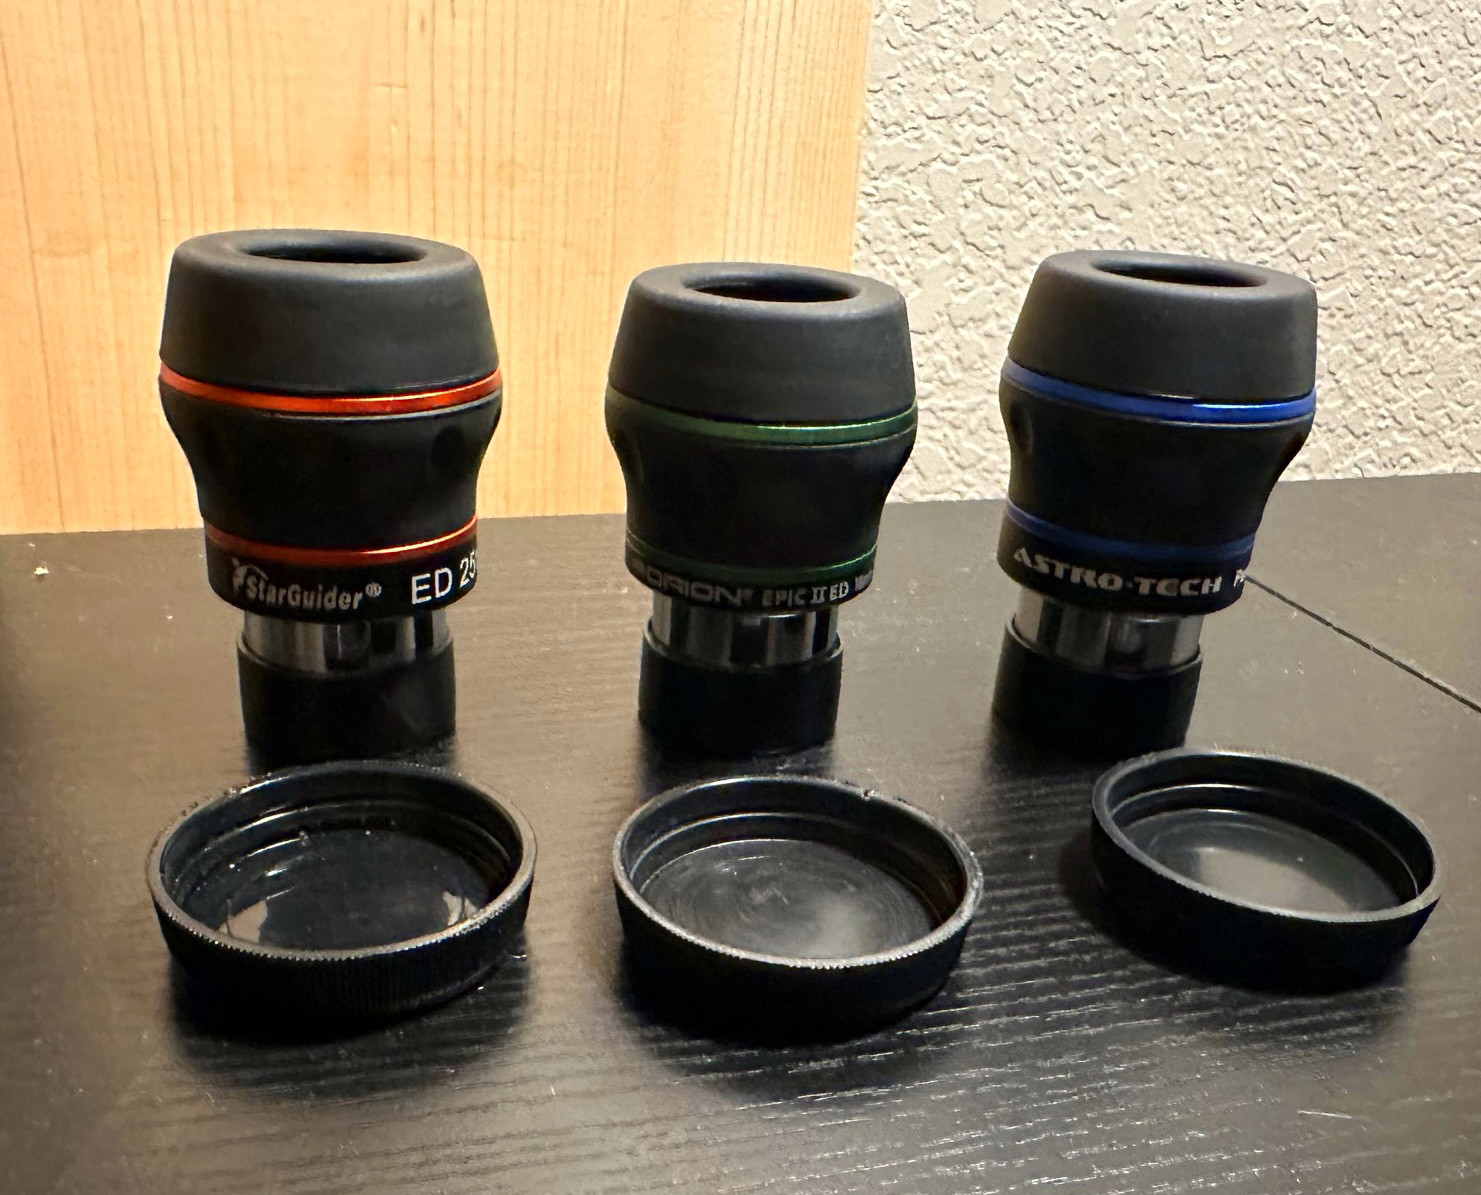 Agena Starguider Dual ED, Orion Epic II ED and Astro-Tech Paradigm Dual ED eyepieces 